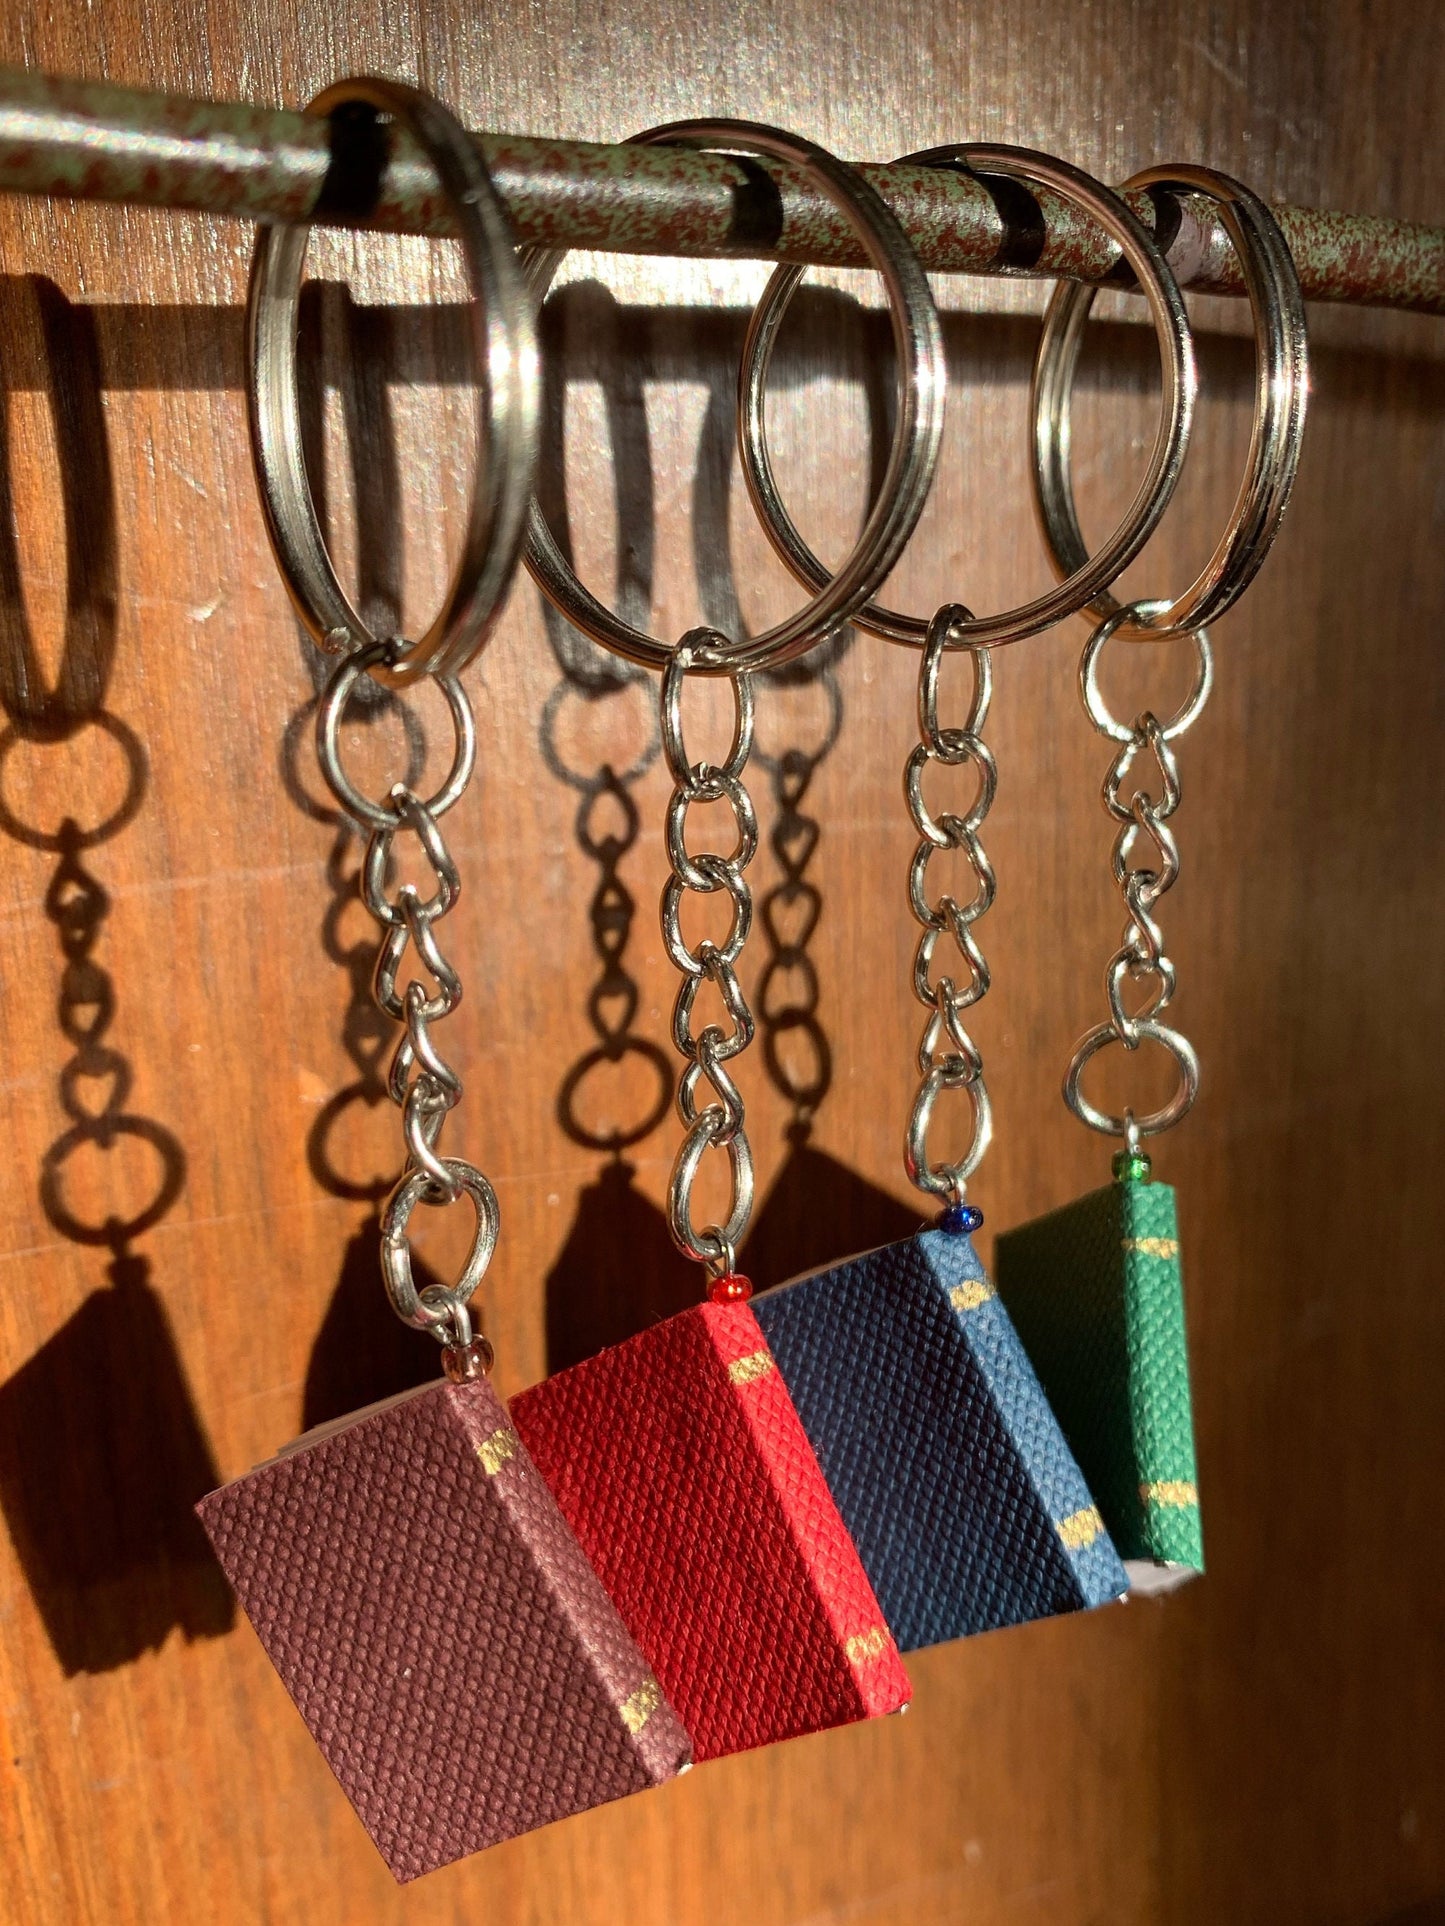 4 different colors of book keychains